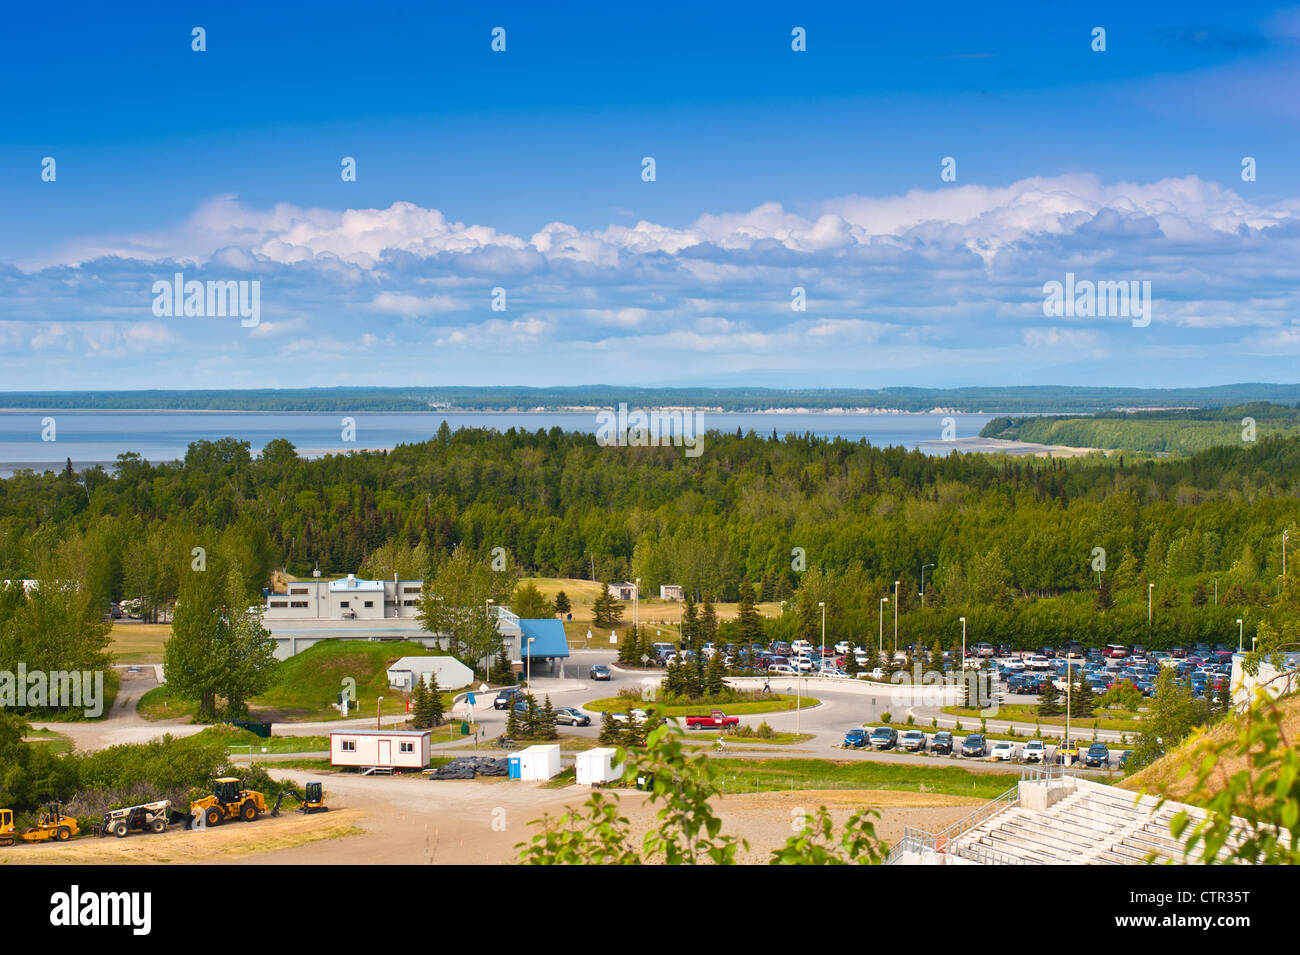 View overlooking the Kincaid Park Chalet and Cook Inlet, Anchorage, Southcentral Alaska, Summer Stock Photo